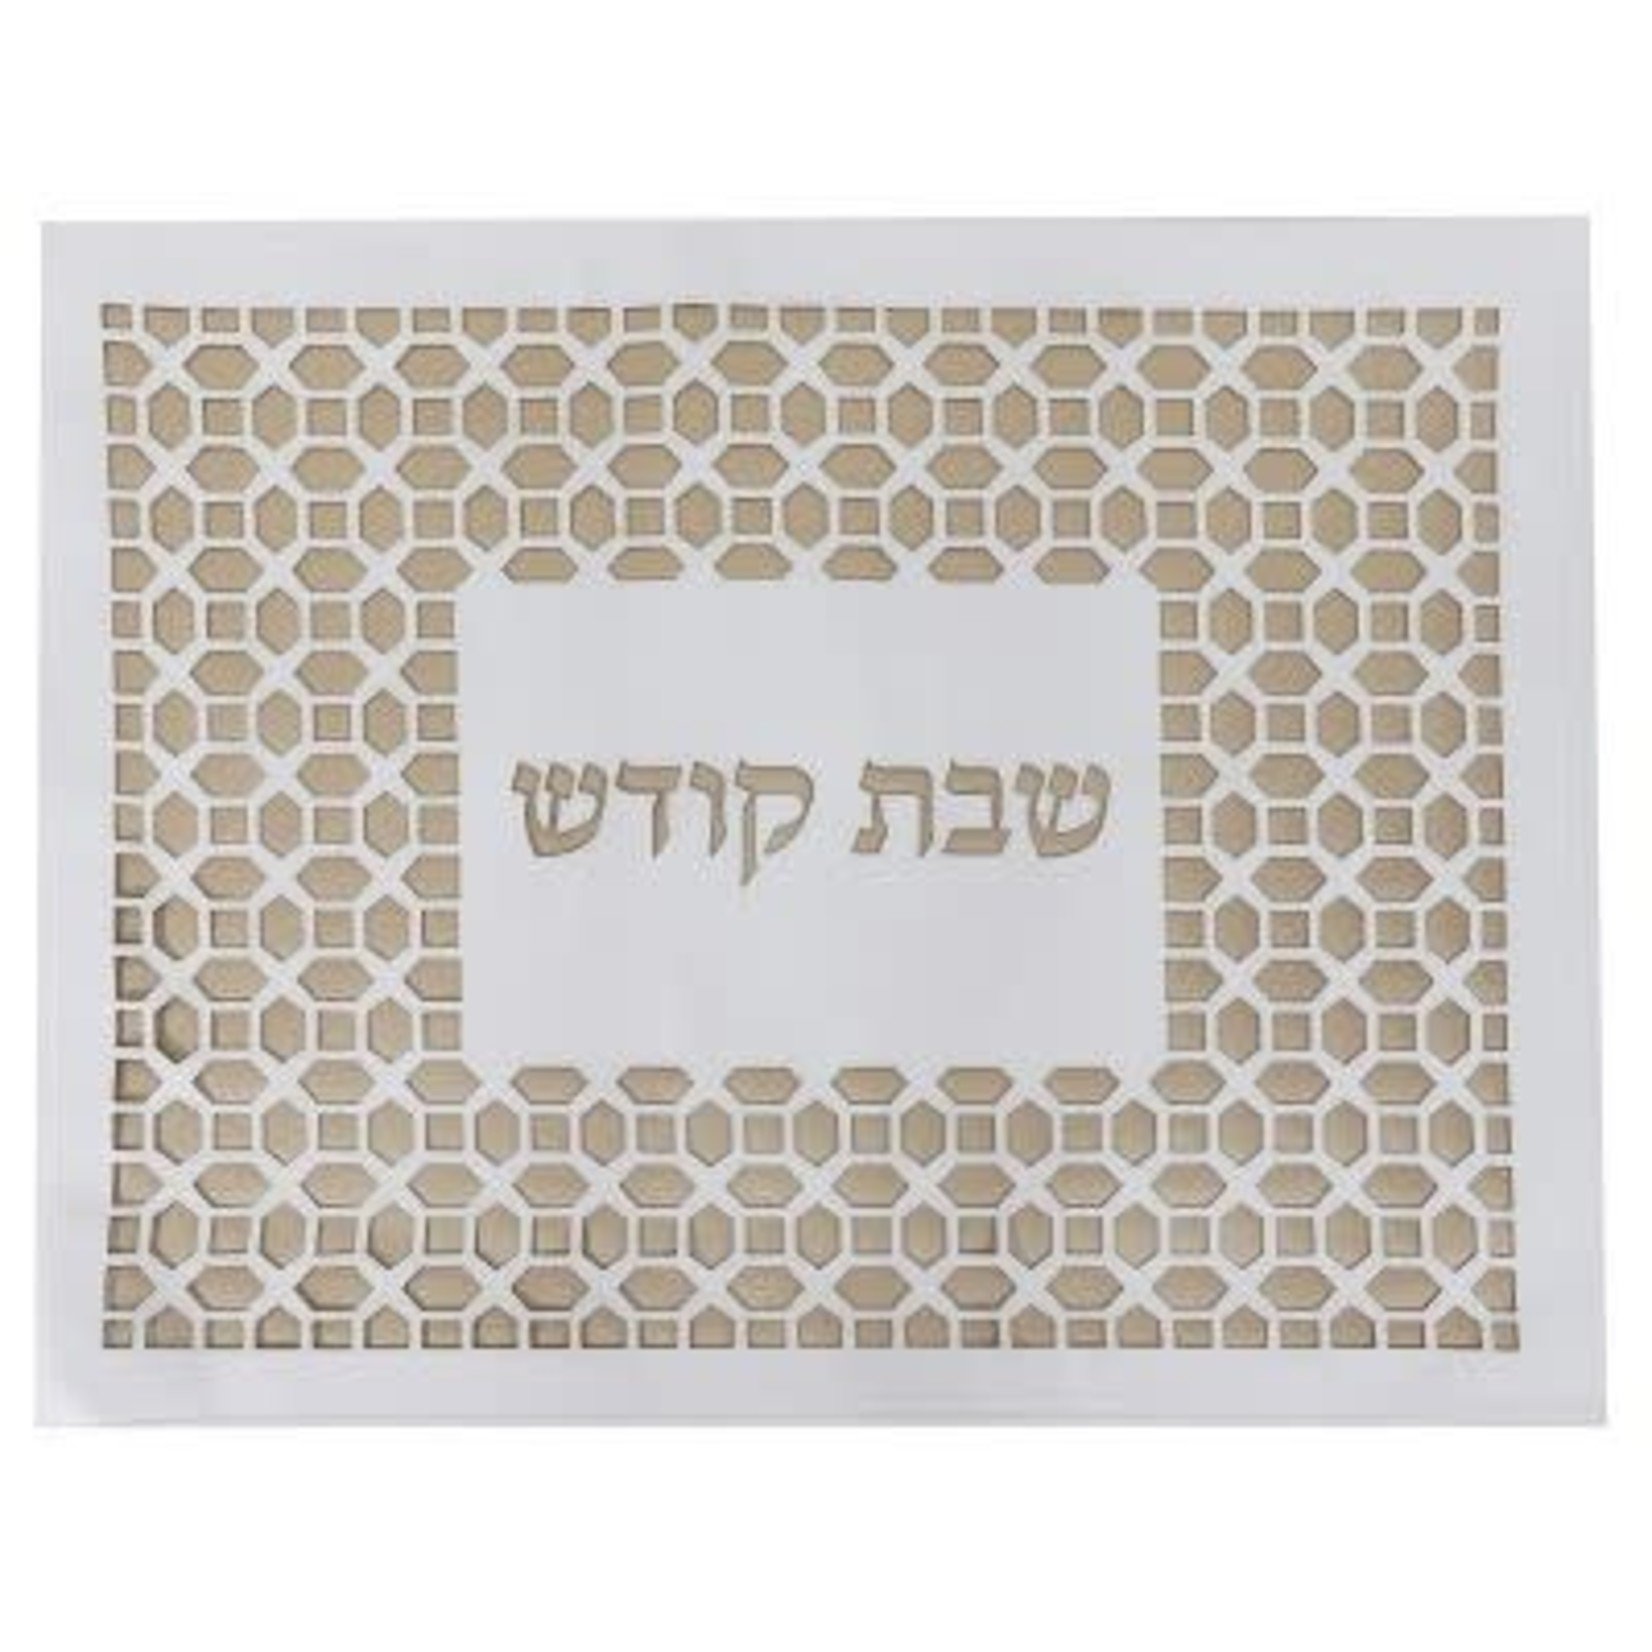 183112 Leather Look Gold & White Design Challah Cover Laser Cut 17.5" X 21.5"